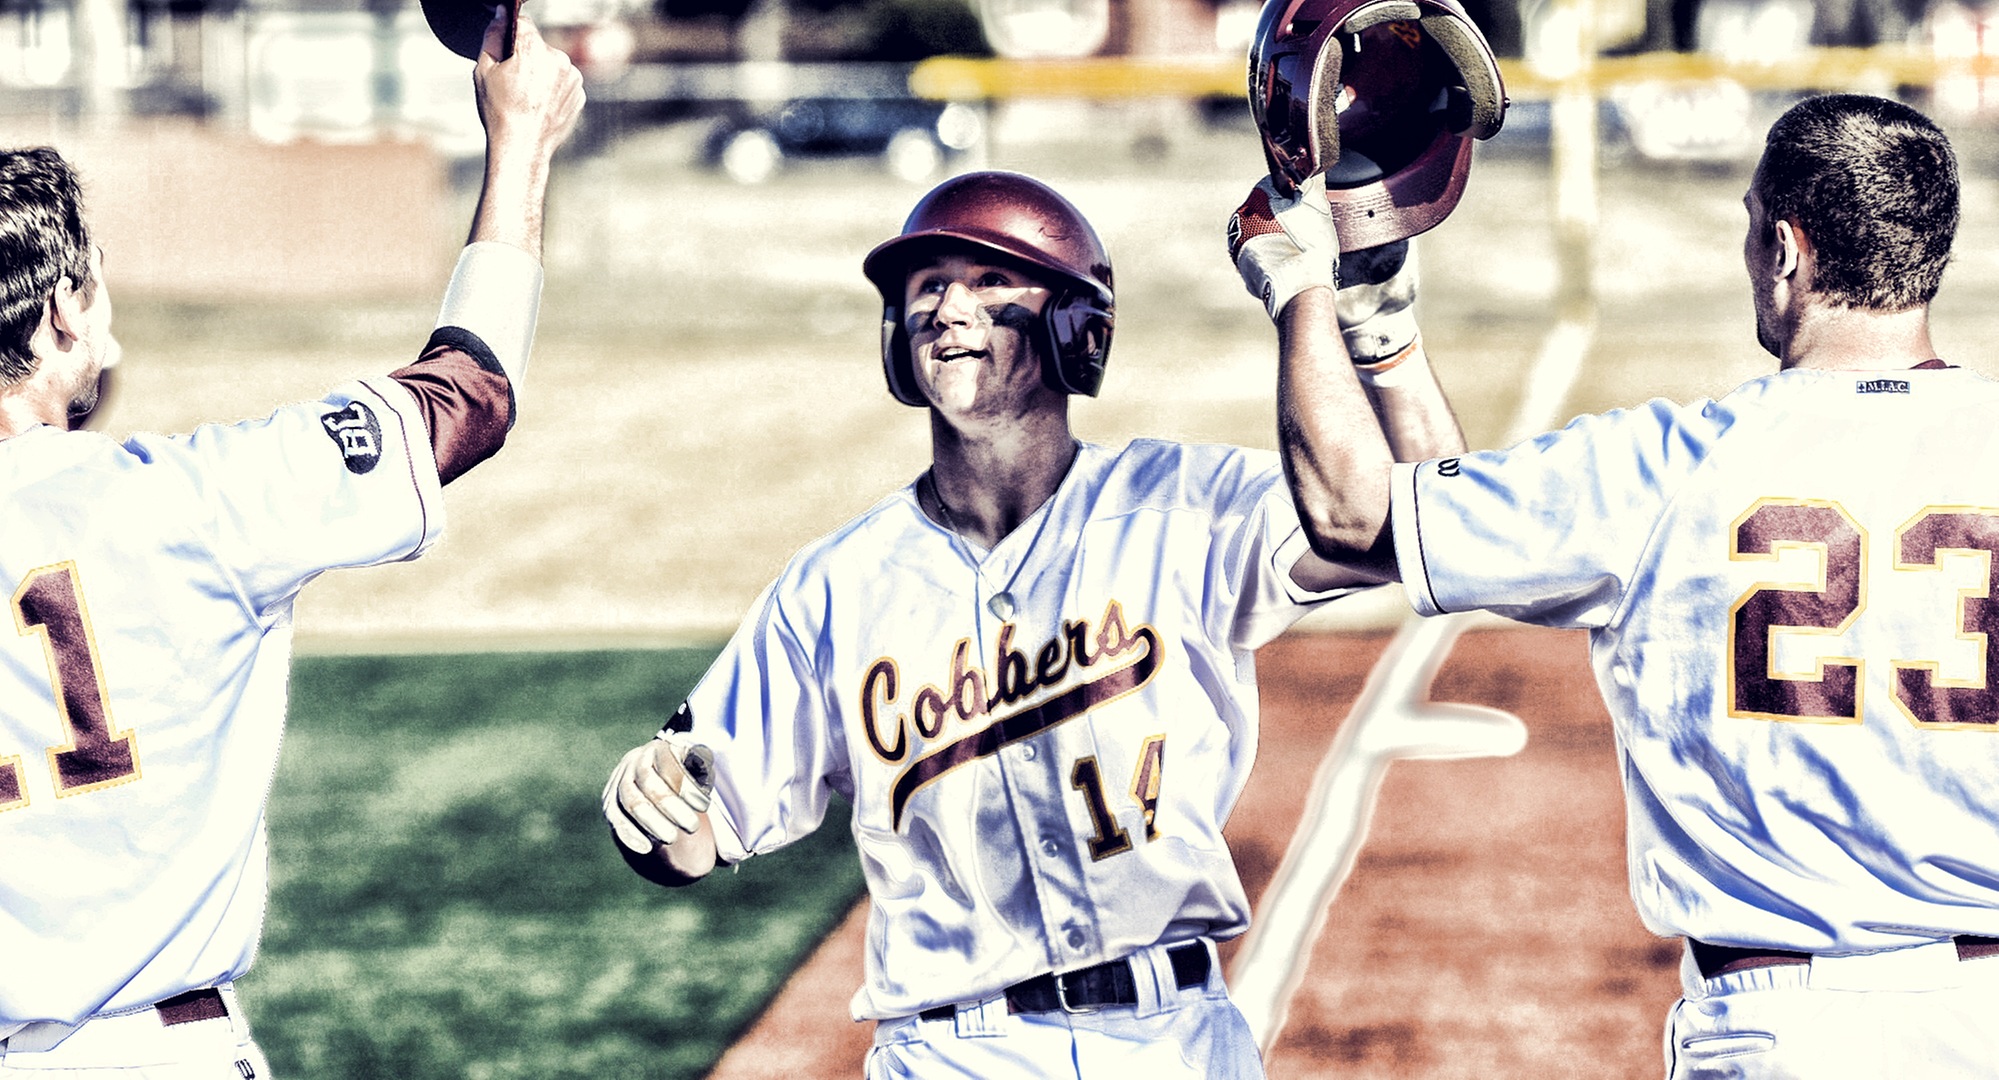 Junior Chad Johnson, who led the Cobbers in home runs last year, is one of the team's top returners in 2017.